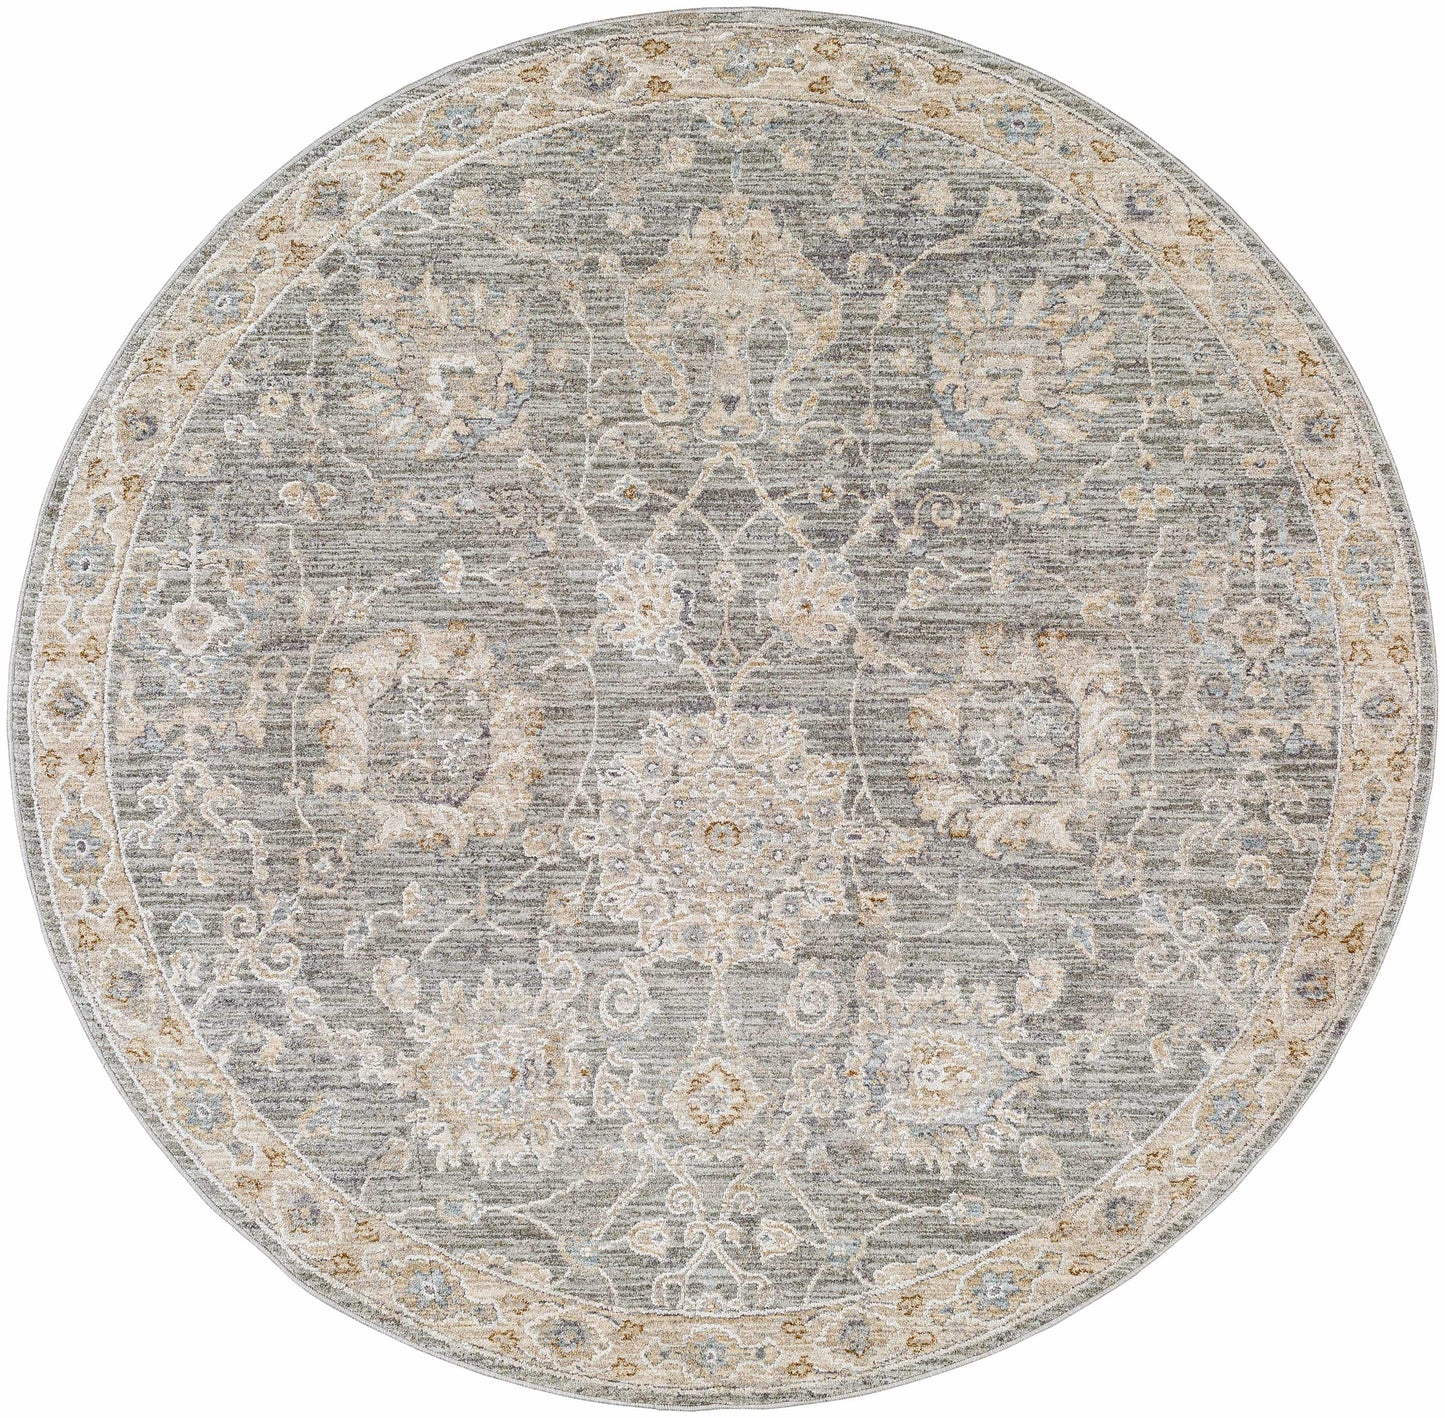 Boutique Rugs Rugs 5'3" Round Monterey Gray Persian Rug